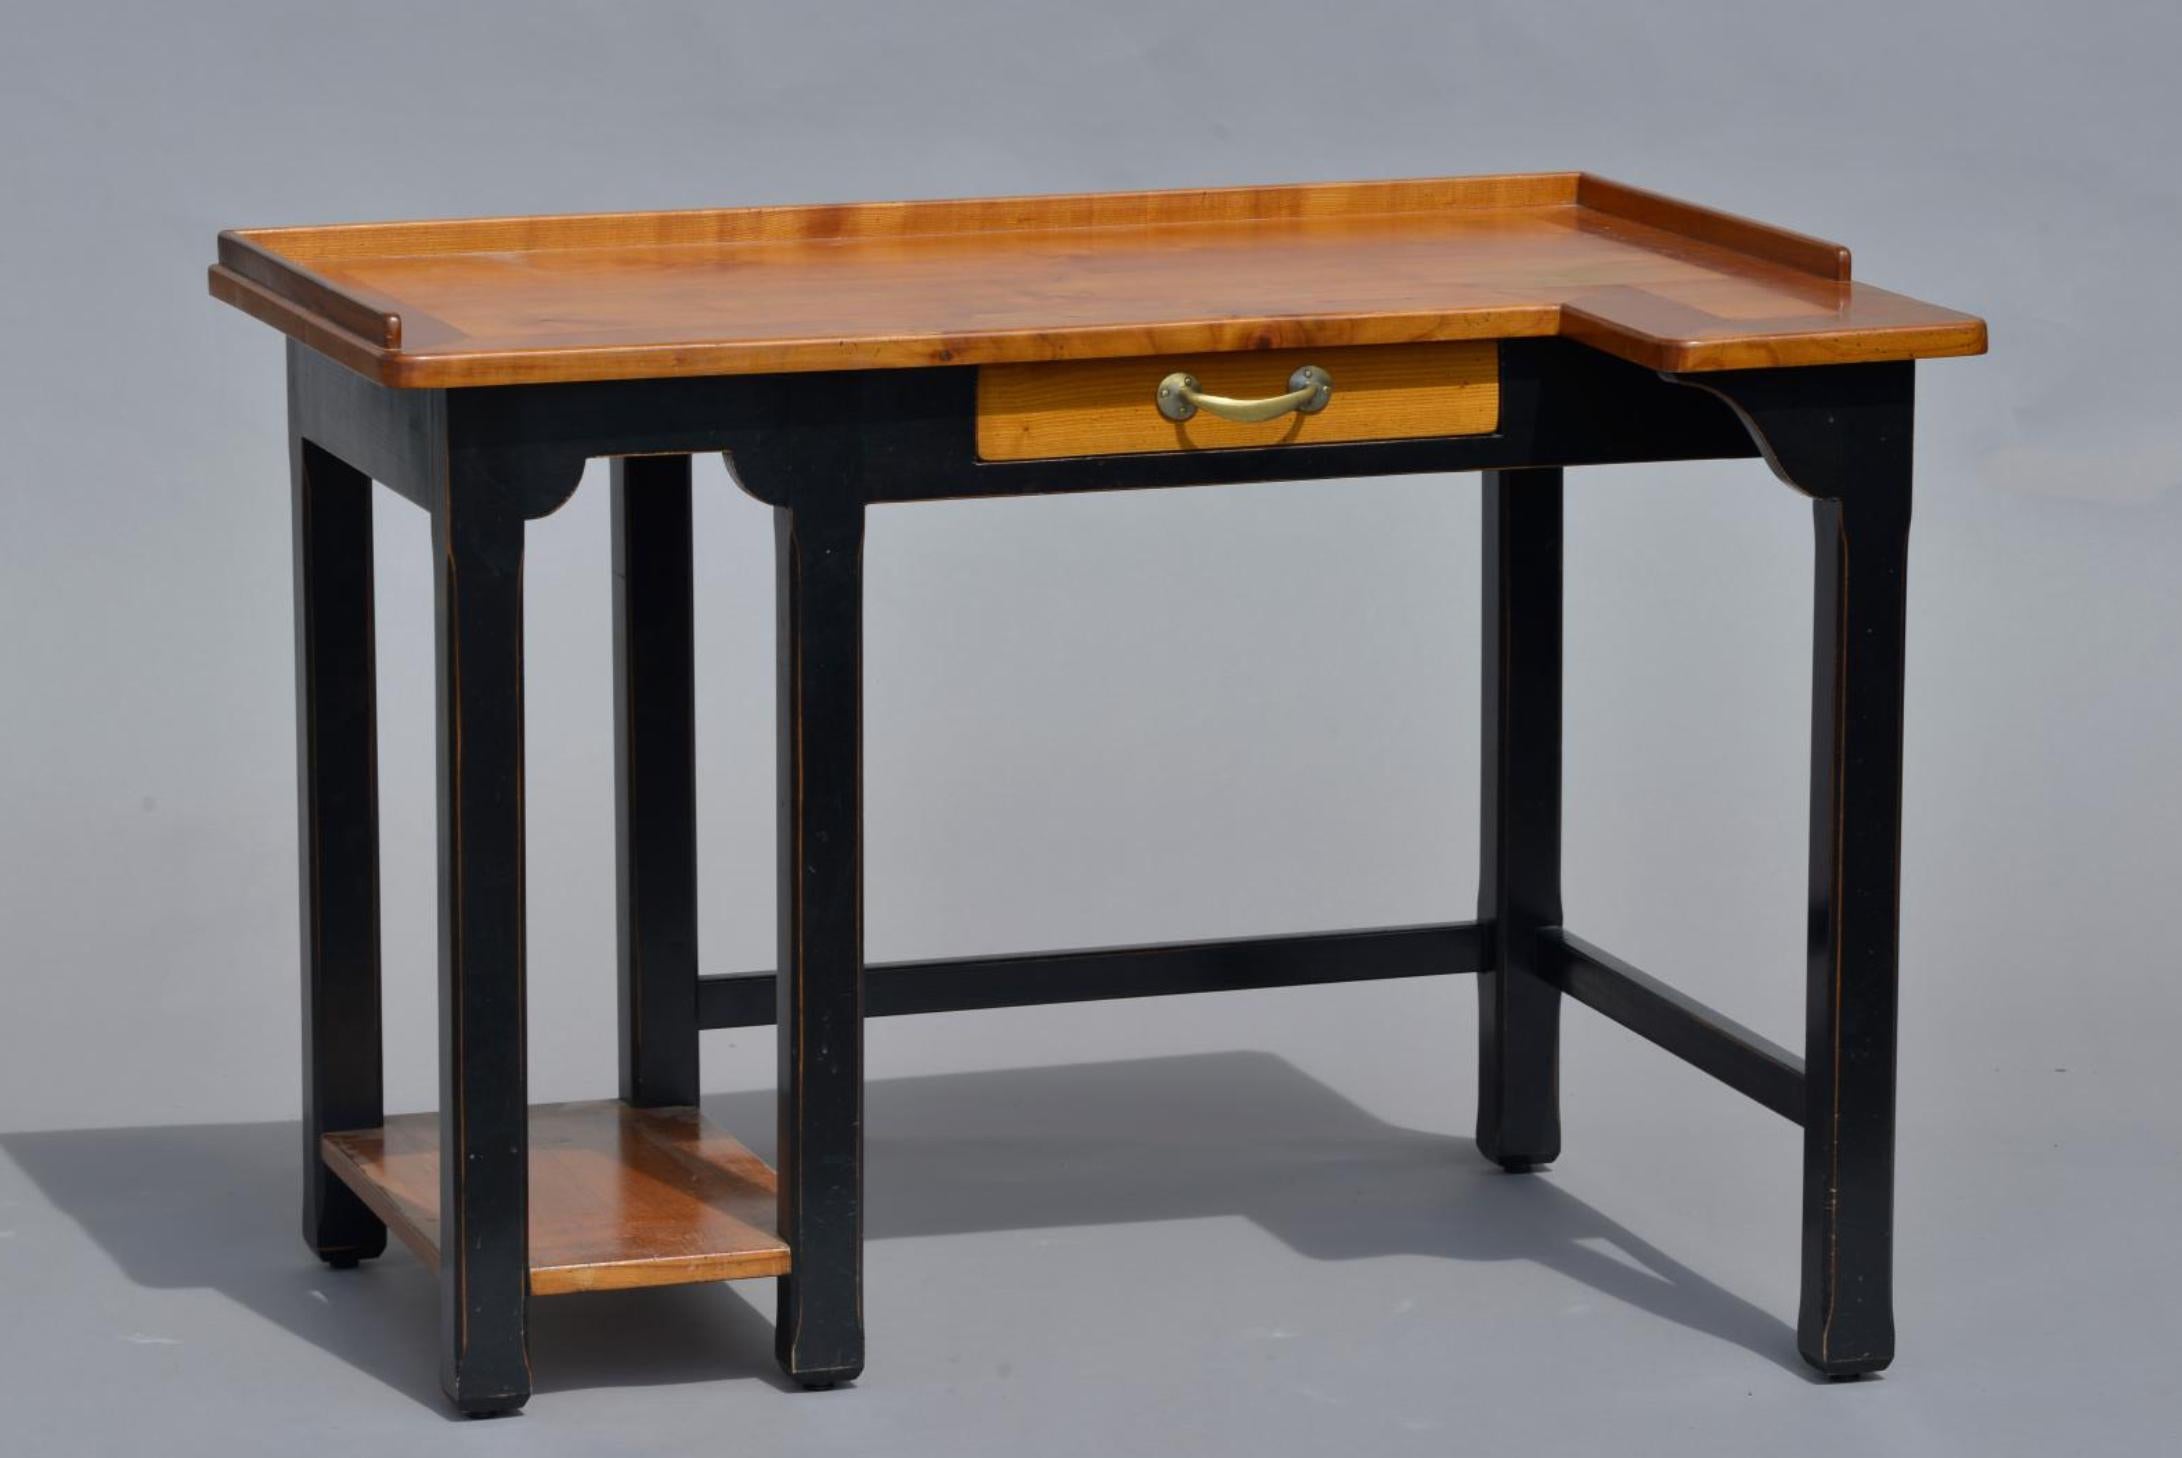 French asymmetrical writing desk made of solid wood in two colors. It is raised on six hand painted in black lags connected with a small shelf on the left side. There is a small drawer in the middle of the front part. Very good condition.
France,